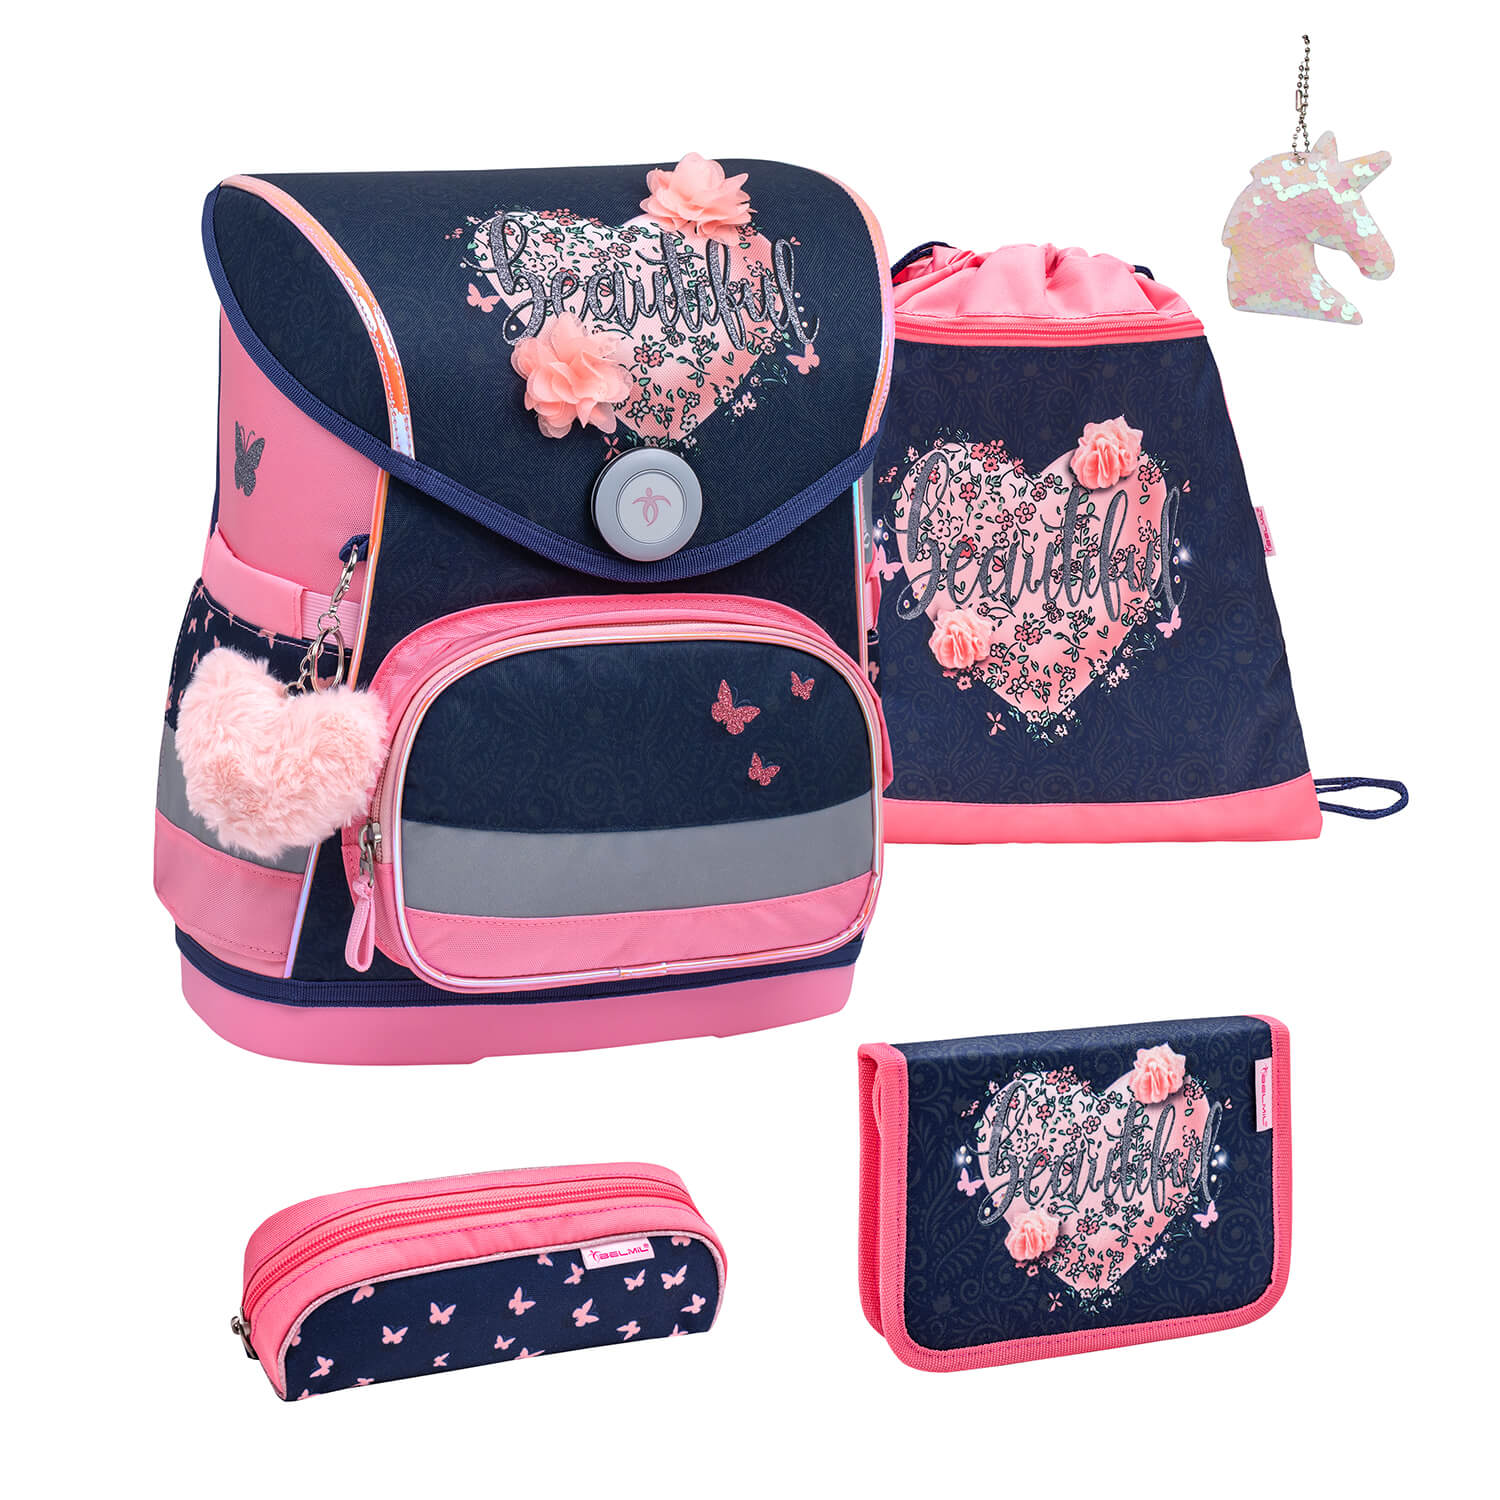 Compact Beautiful Flowers schoolbag set 5 pcs with GRATIS keychain